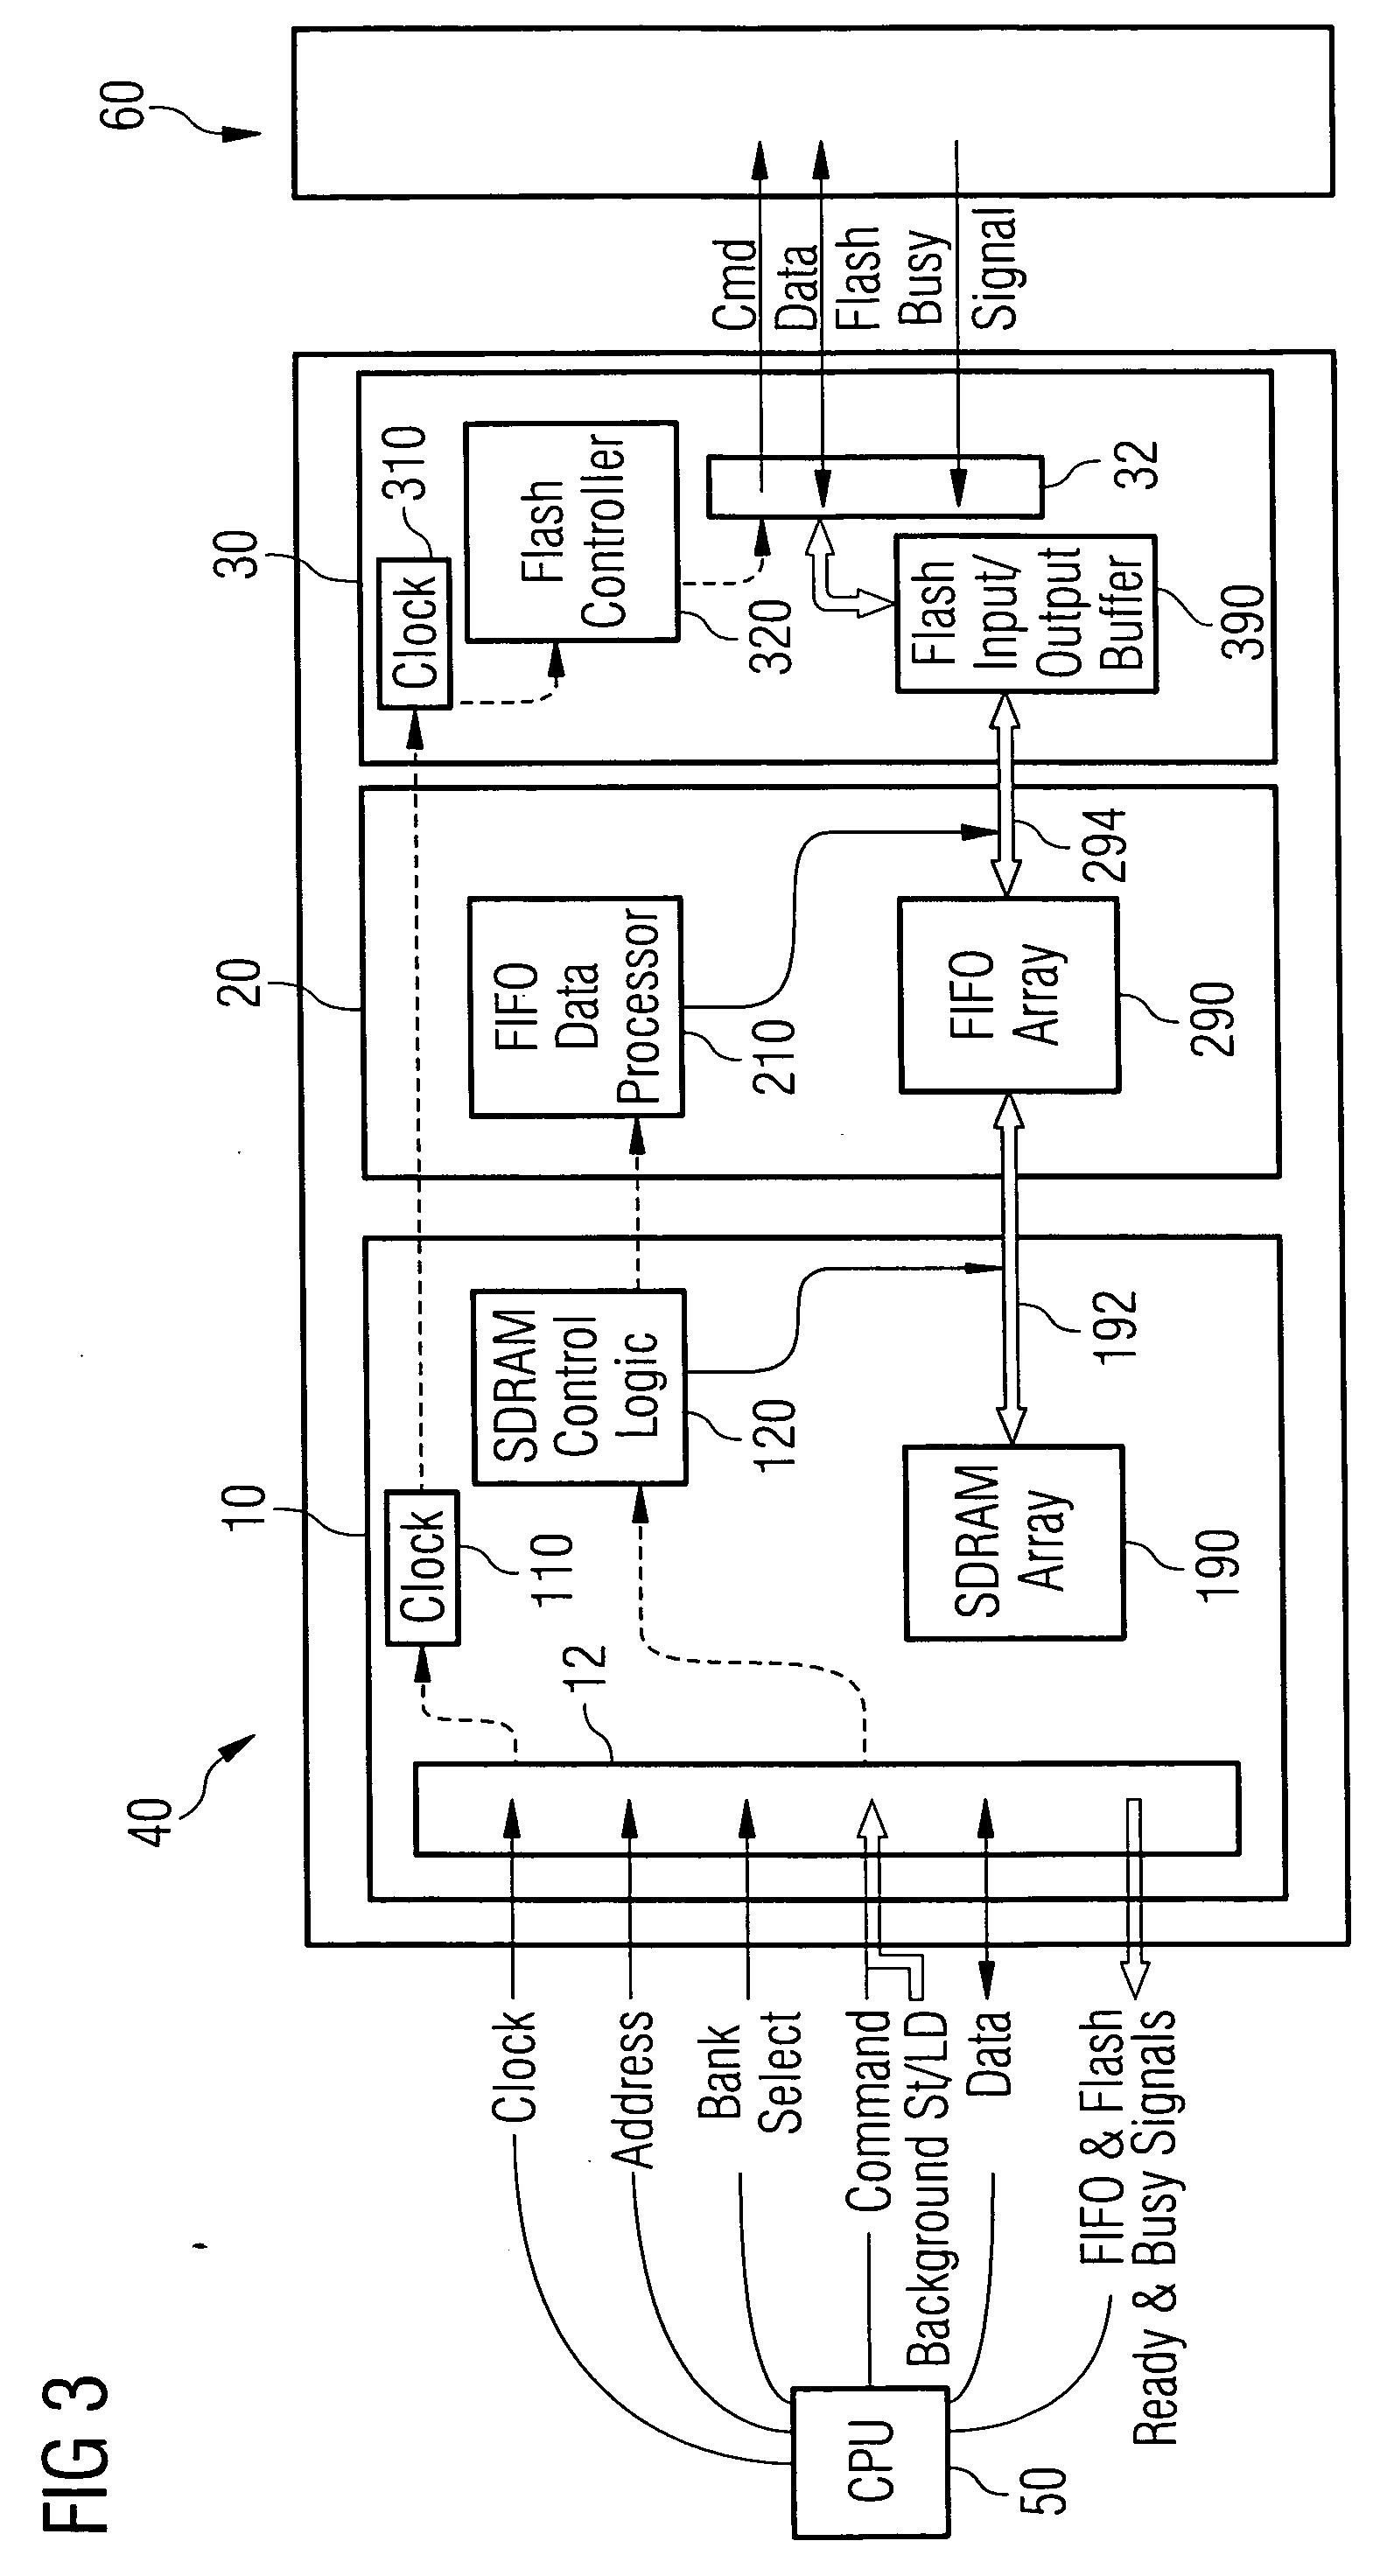 DRAM chip device well-communicated with flash memory chip and multi-chip package comprising such a device